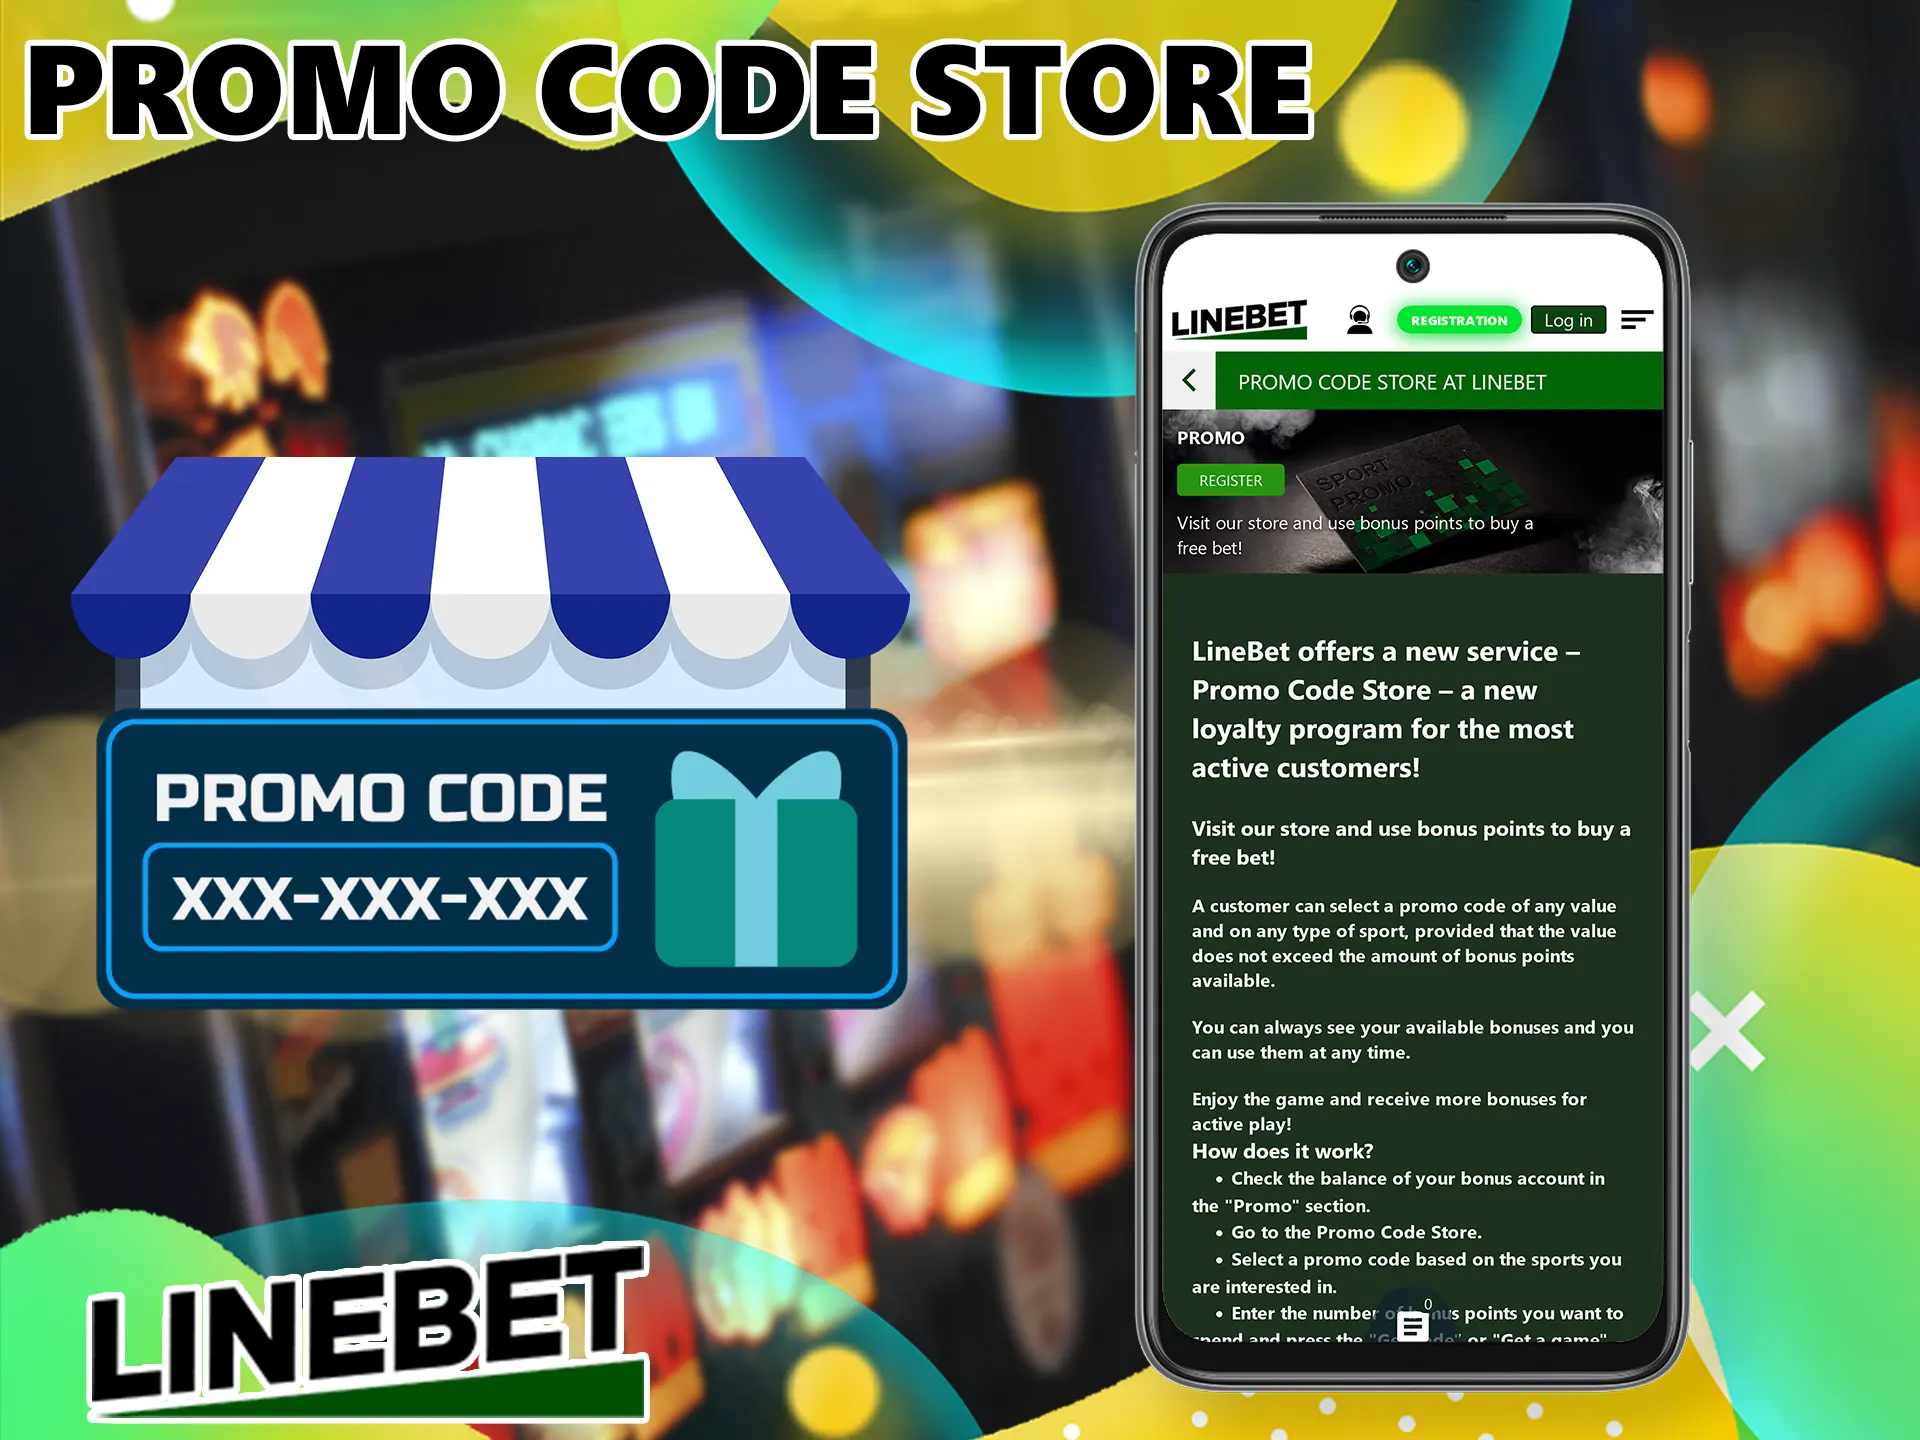 When you place a bet, you accumulate special points as part of the Linebet bonus programme, which you can redeem for symbols that will give you many extra benefits.